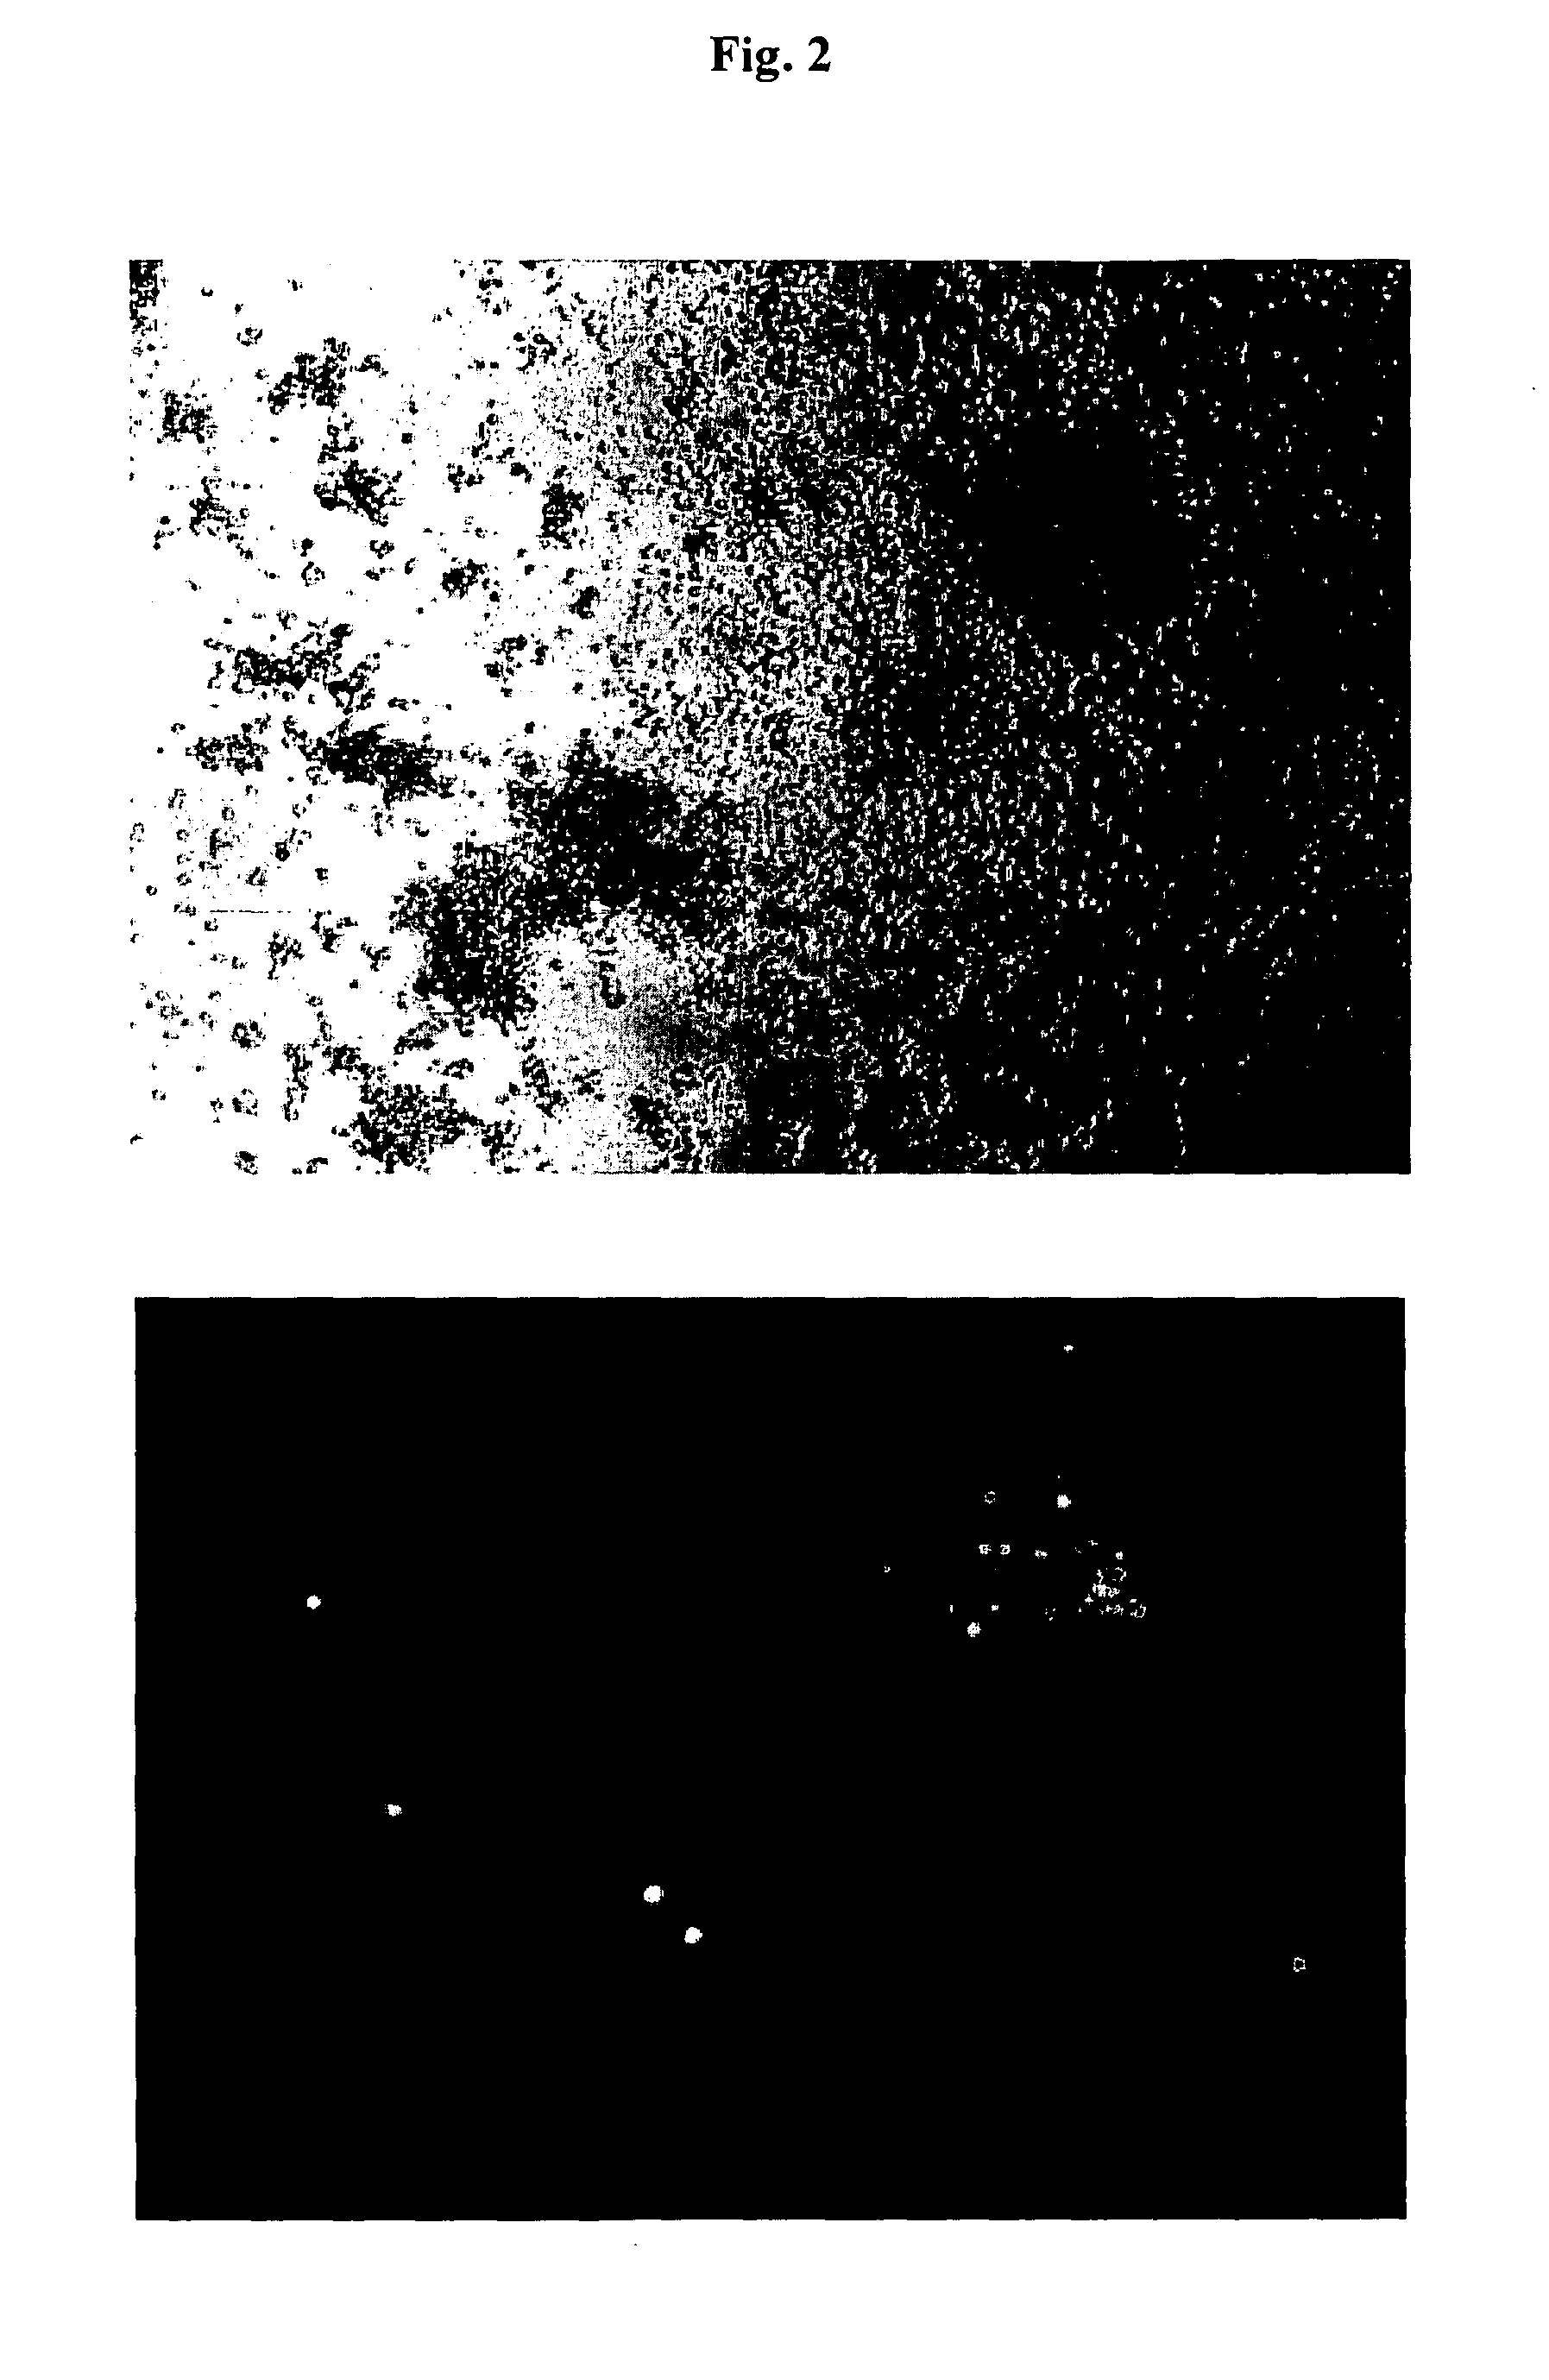 Process for producing molecules containing specialized glycan structures